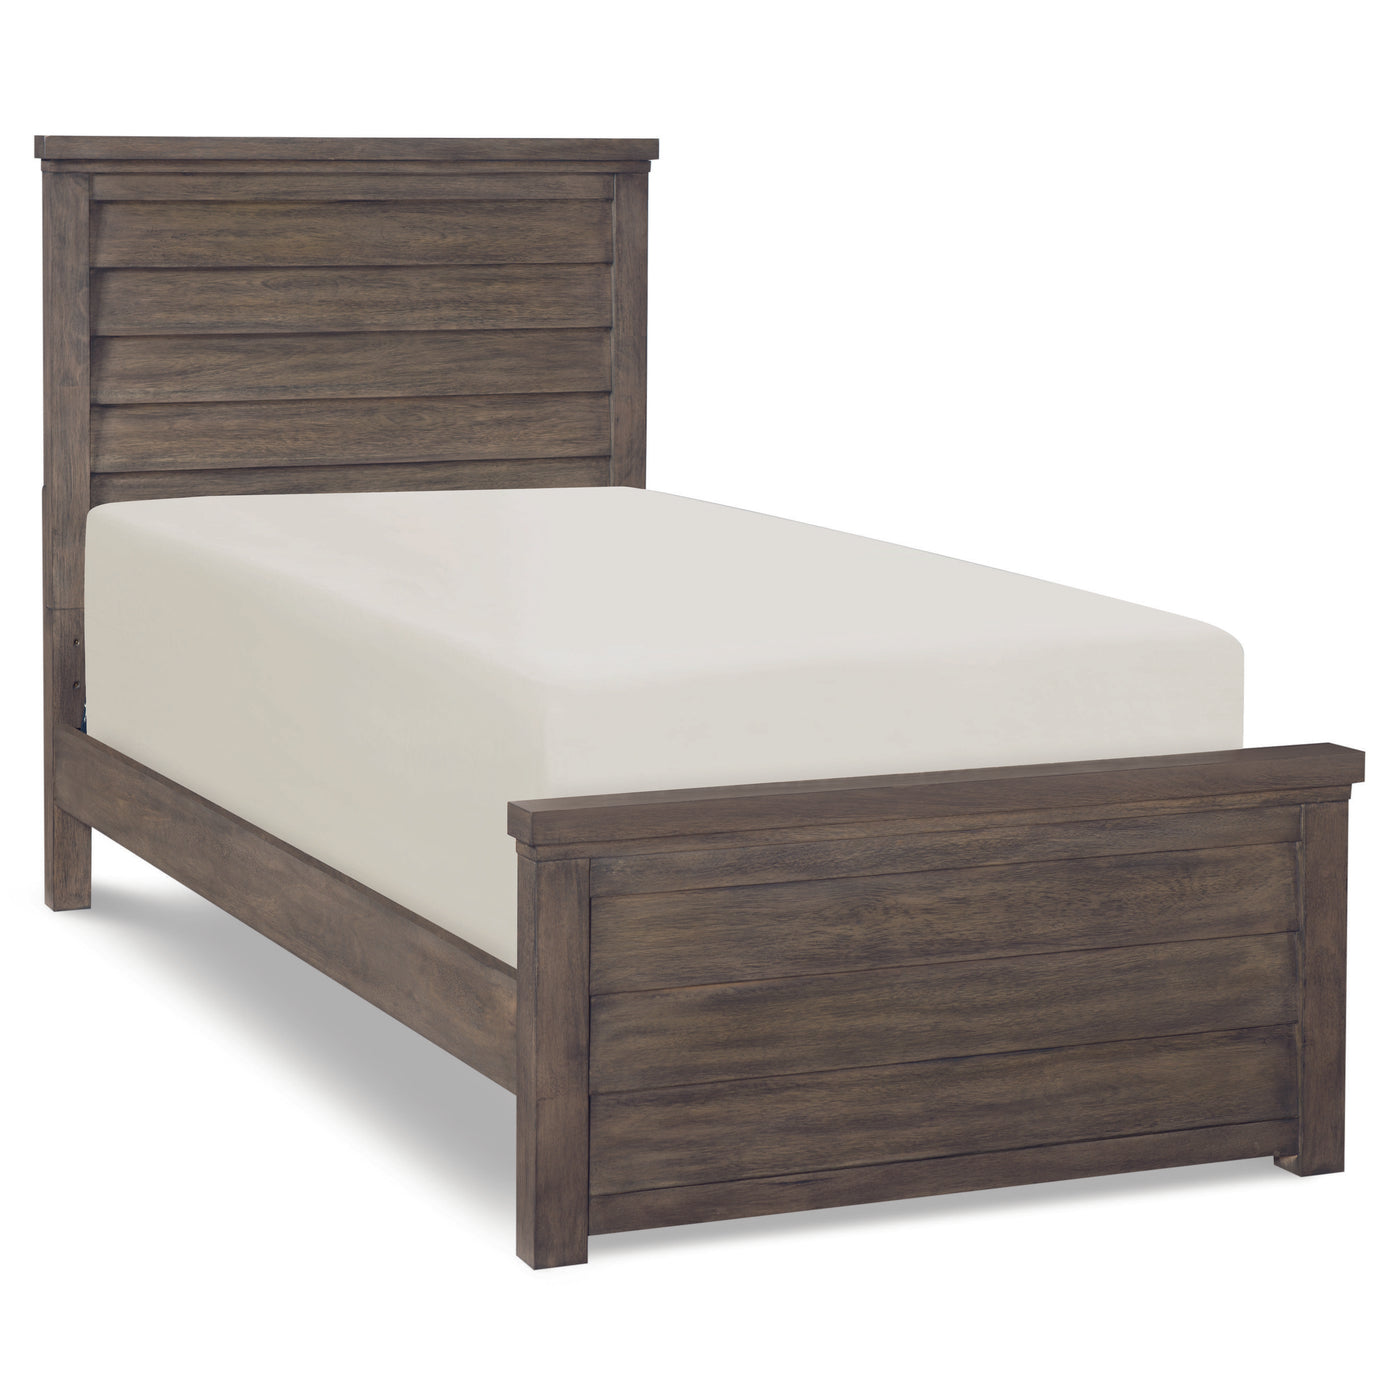 Legacy Classic Kids Bunkhouse Panel Bed